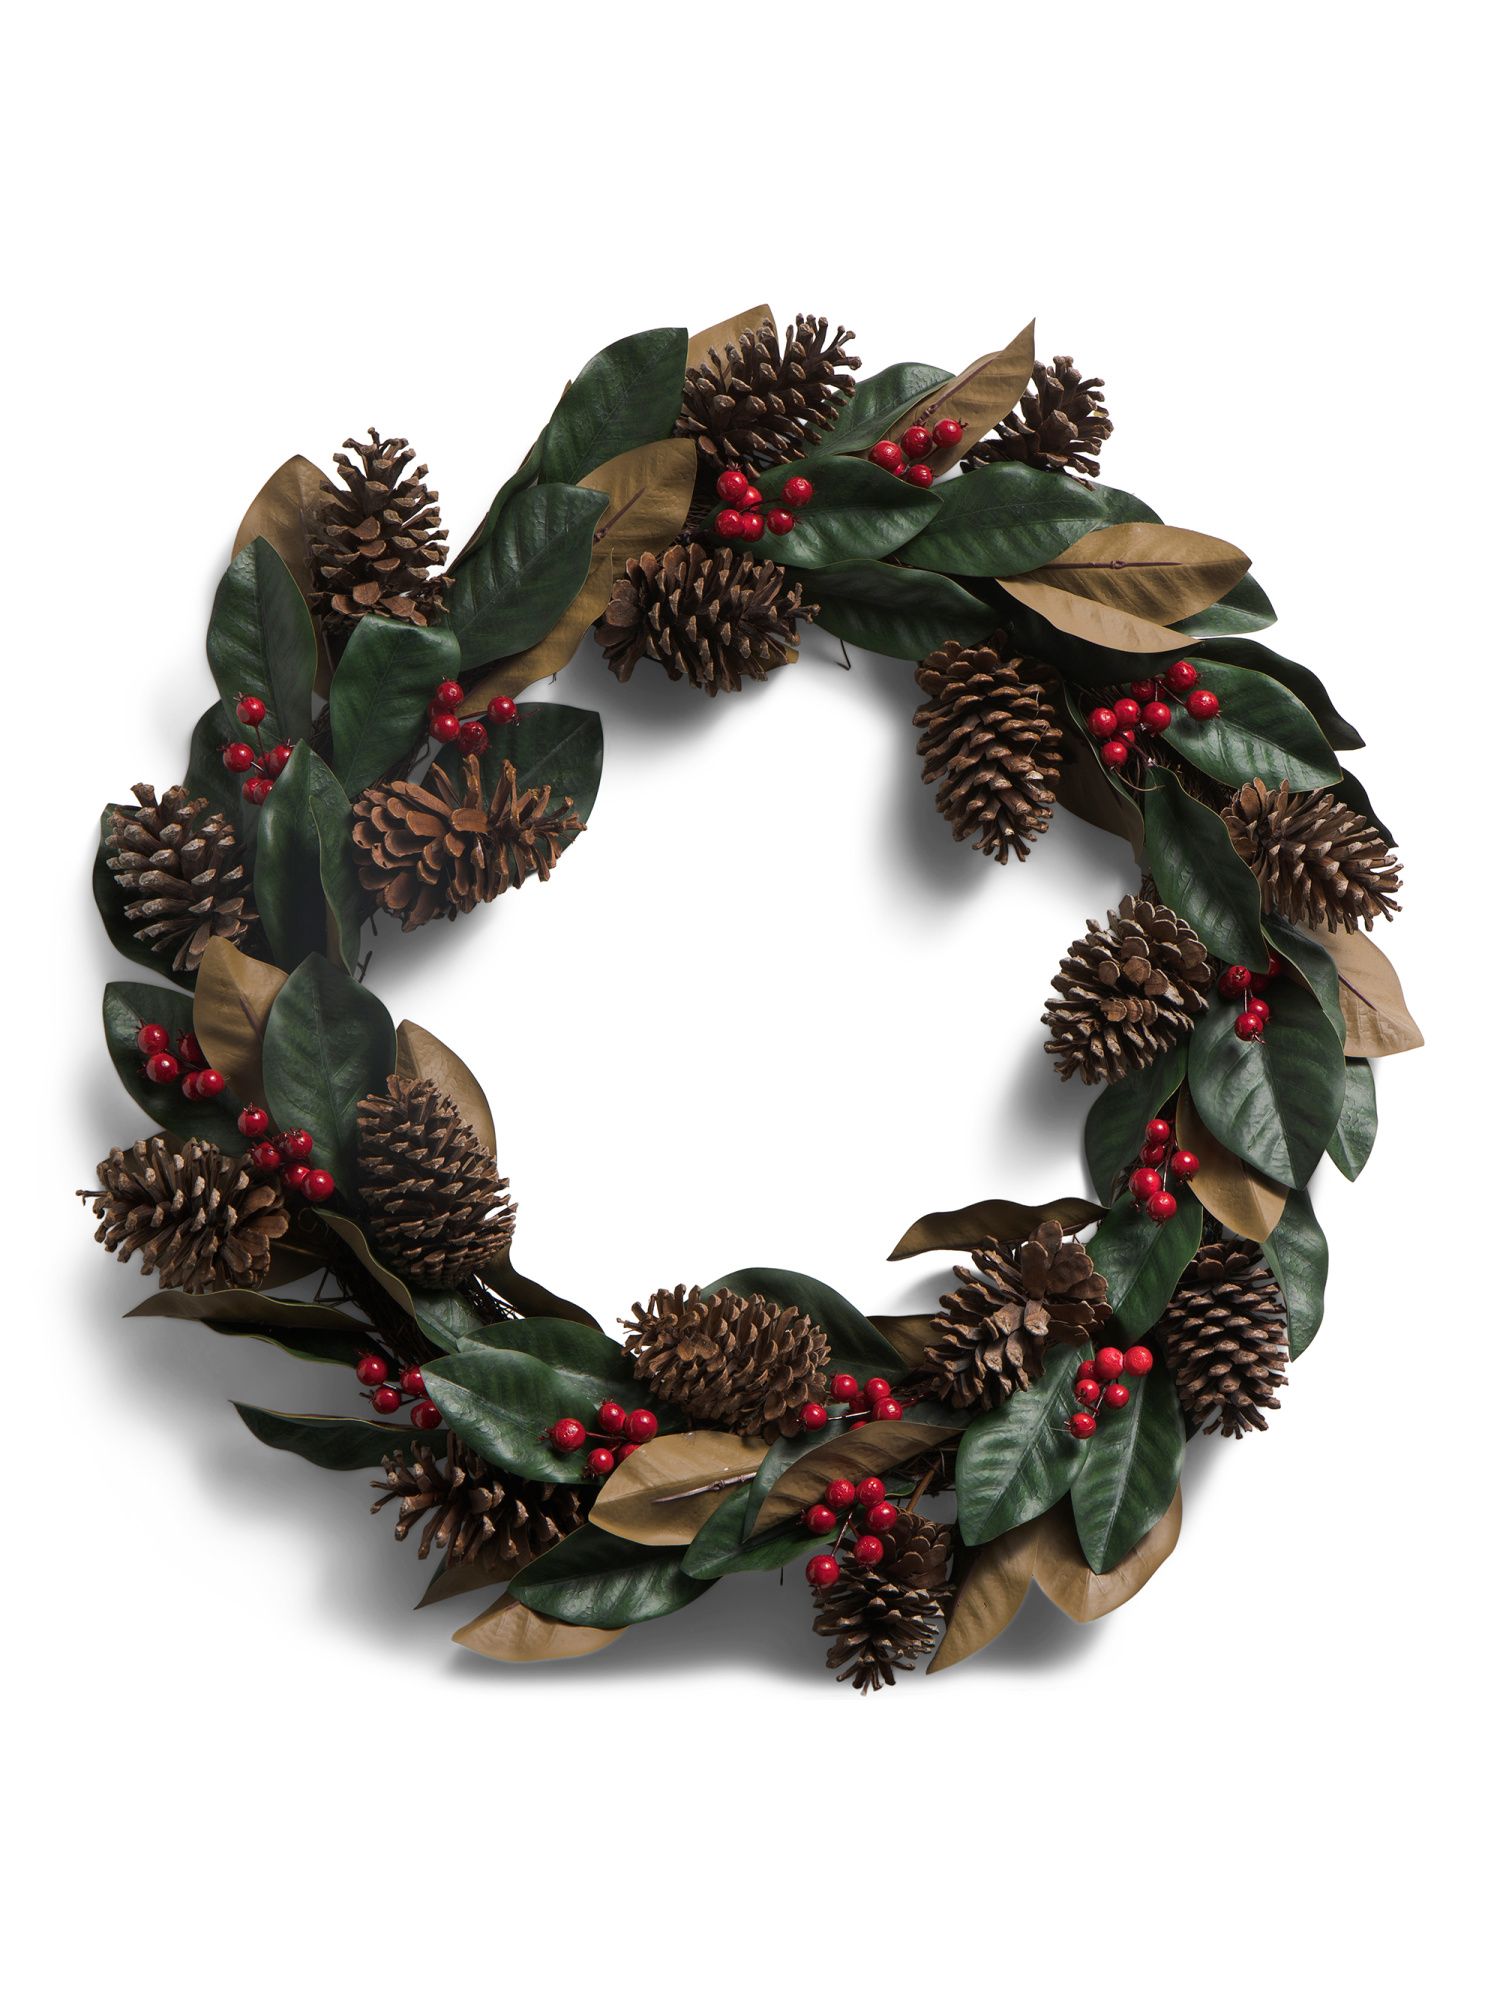 30in Magnolia Wreath With Berries And Pinecones | TJ Maxx